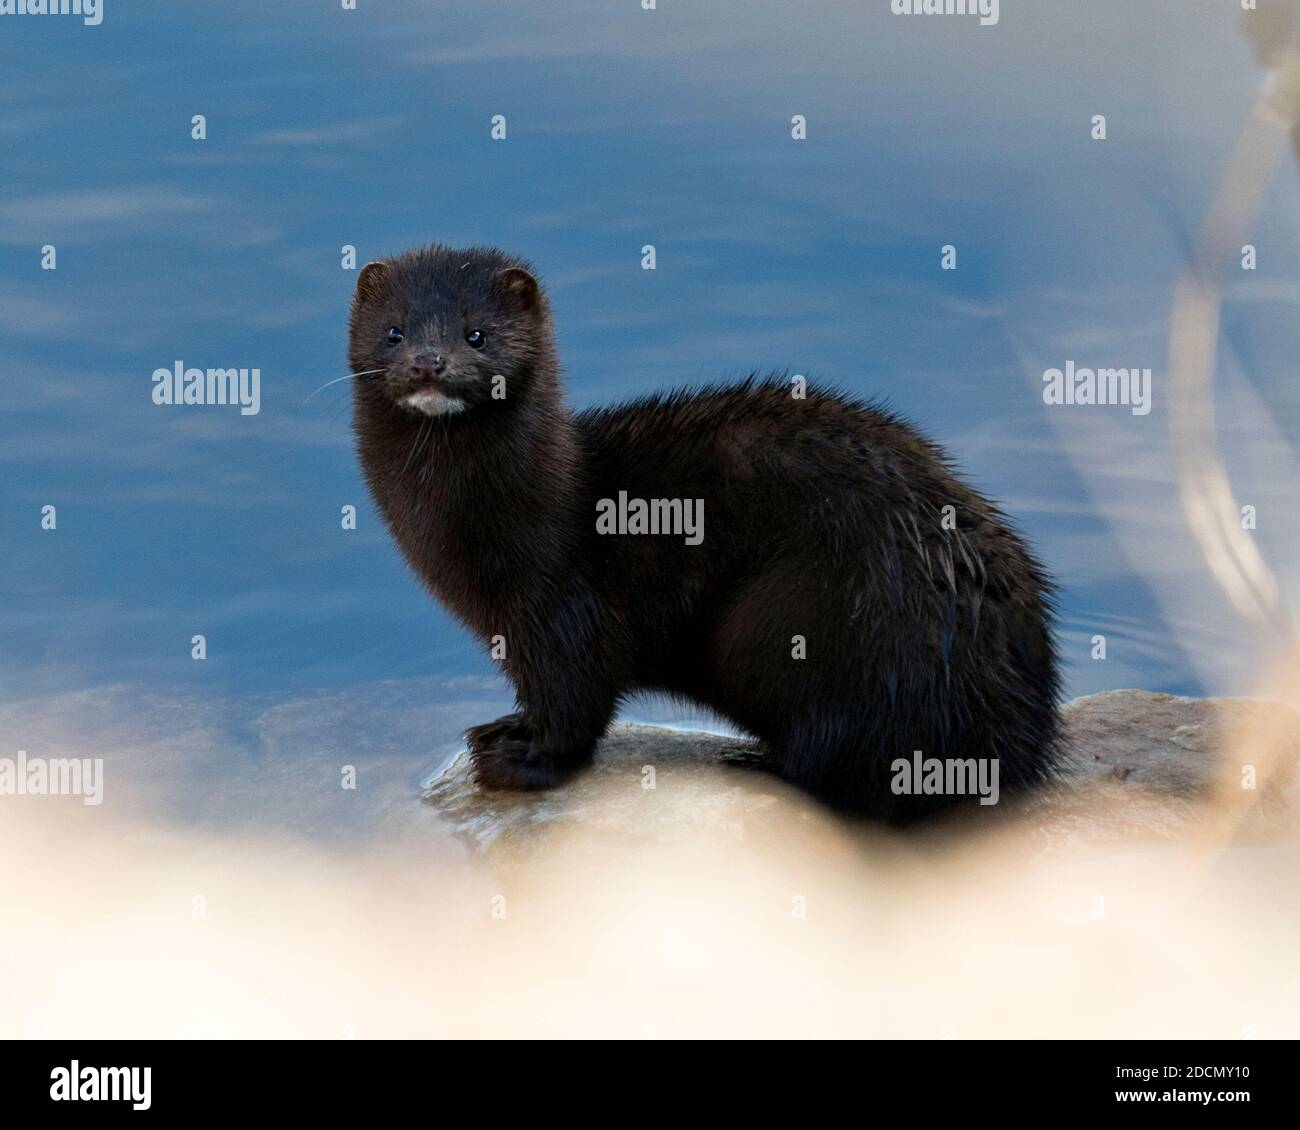 Mink close-up profile view sitting on a rock with blur blue water background in its environment and habitat displaying its brownish fur, paws. Looking Stock Photo